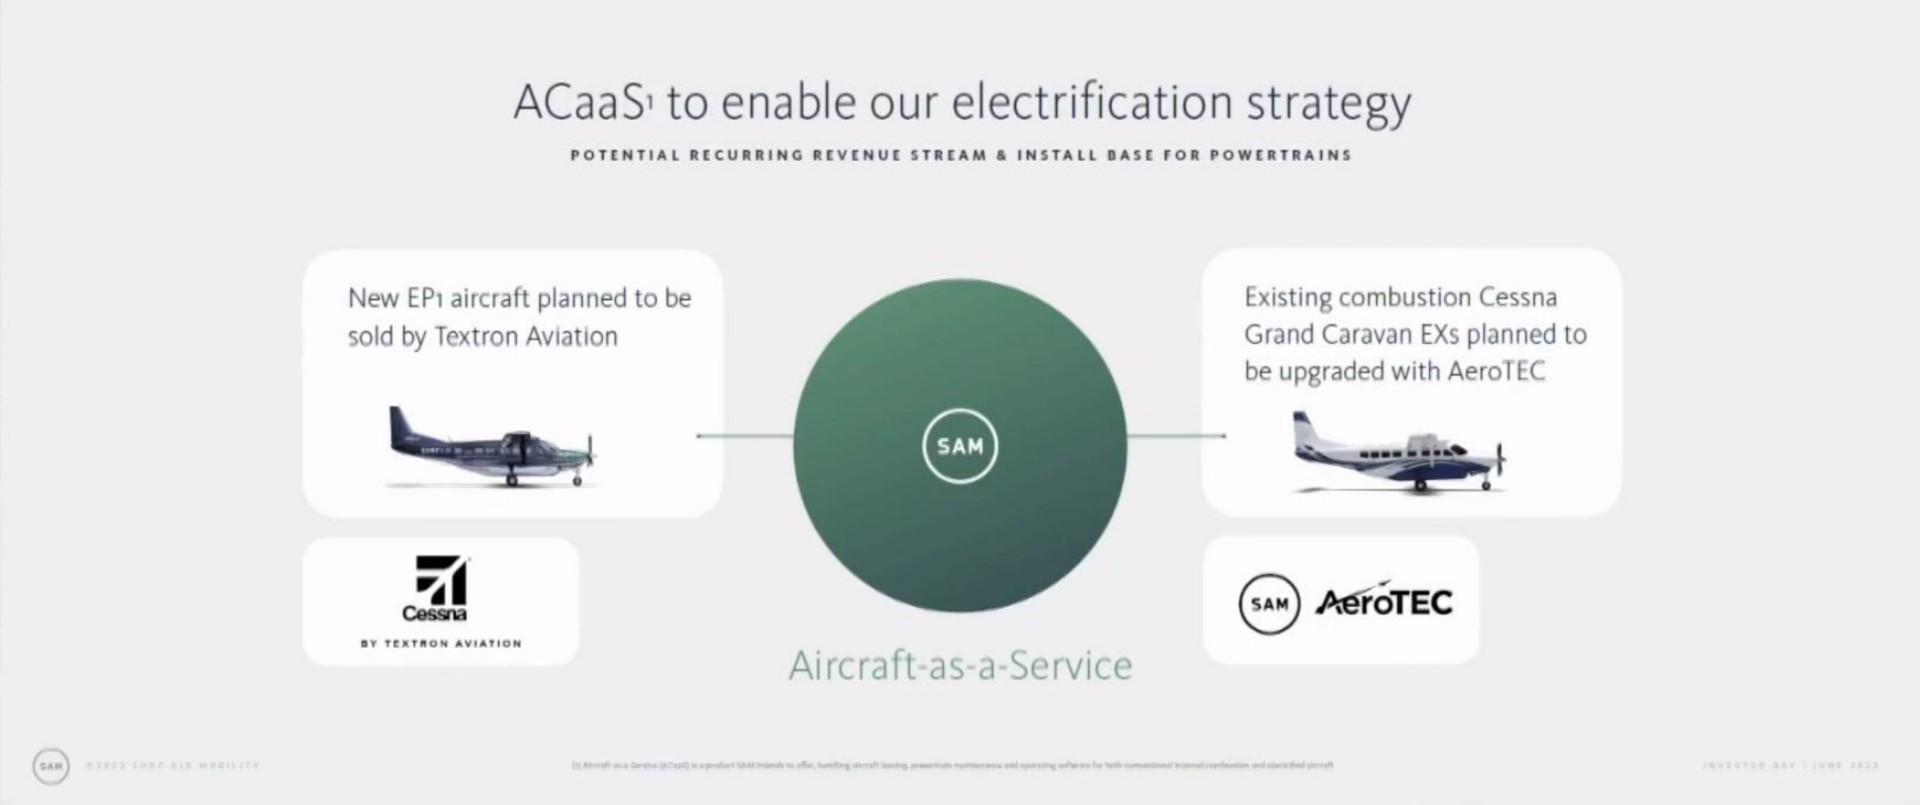 to enable our electrification strategy potential recurring revenue stream install base for new aircraft planned to be sold by aviation existing combustion grand caravan exs planned to be upgraded with oral as aircraft as a service | Surf Air